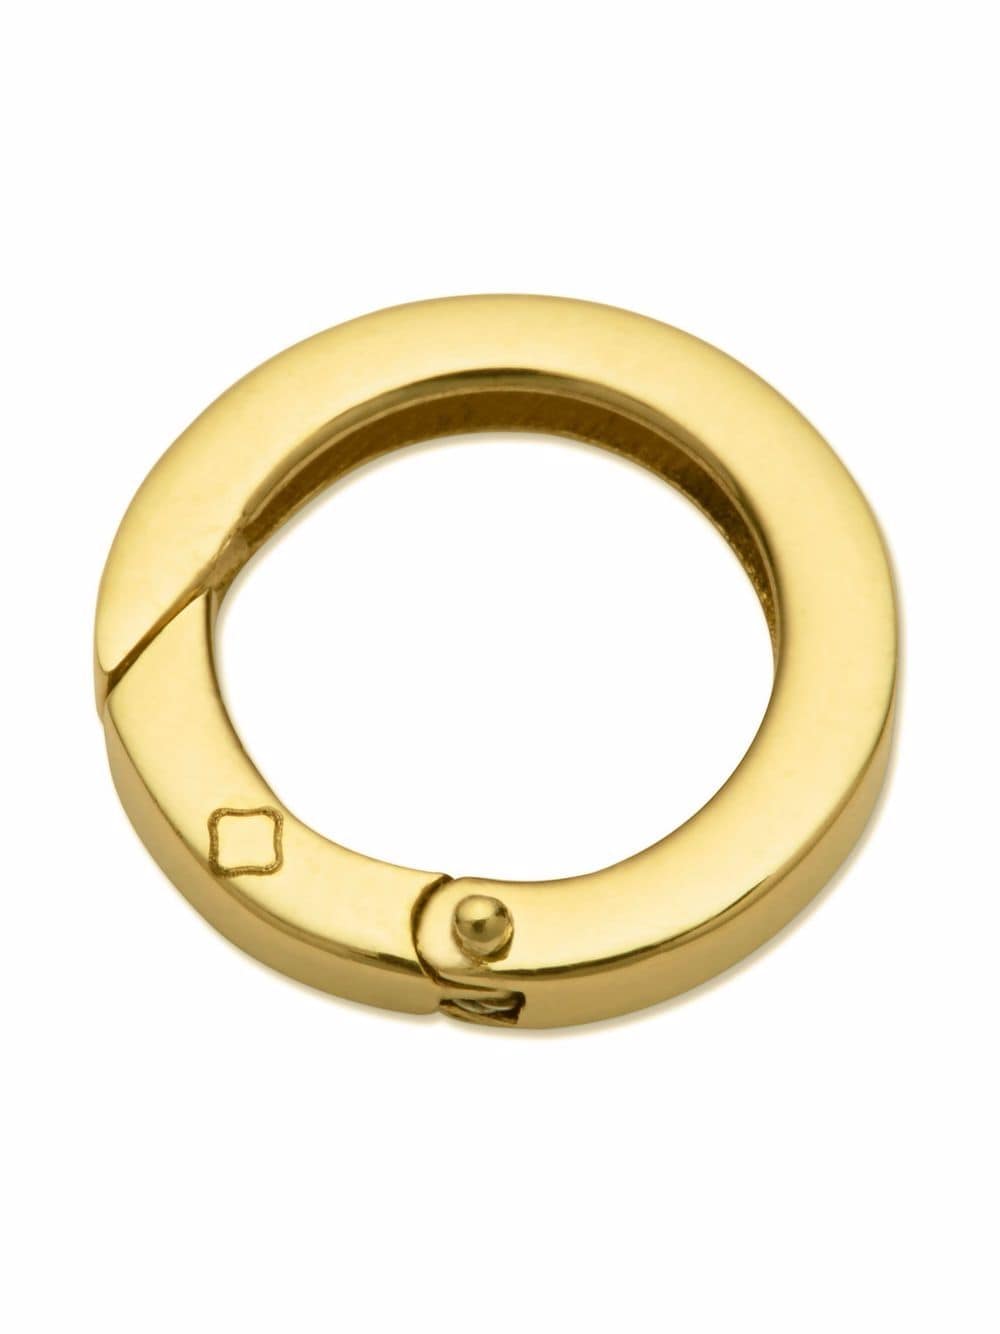 18kt yellow gold jump ring